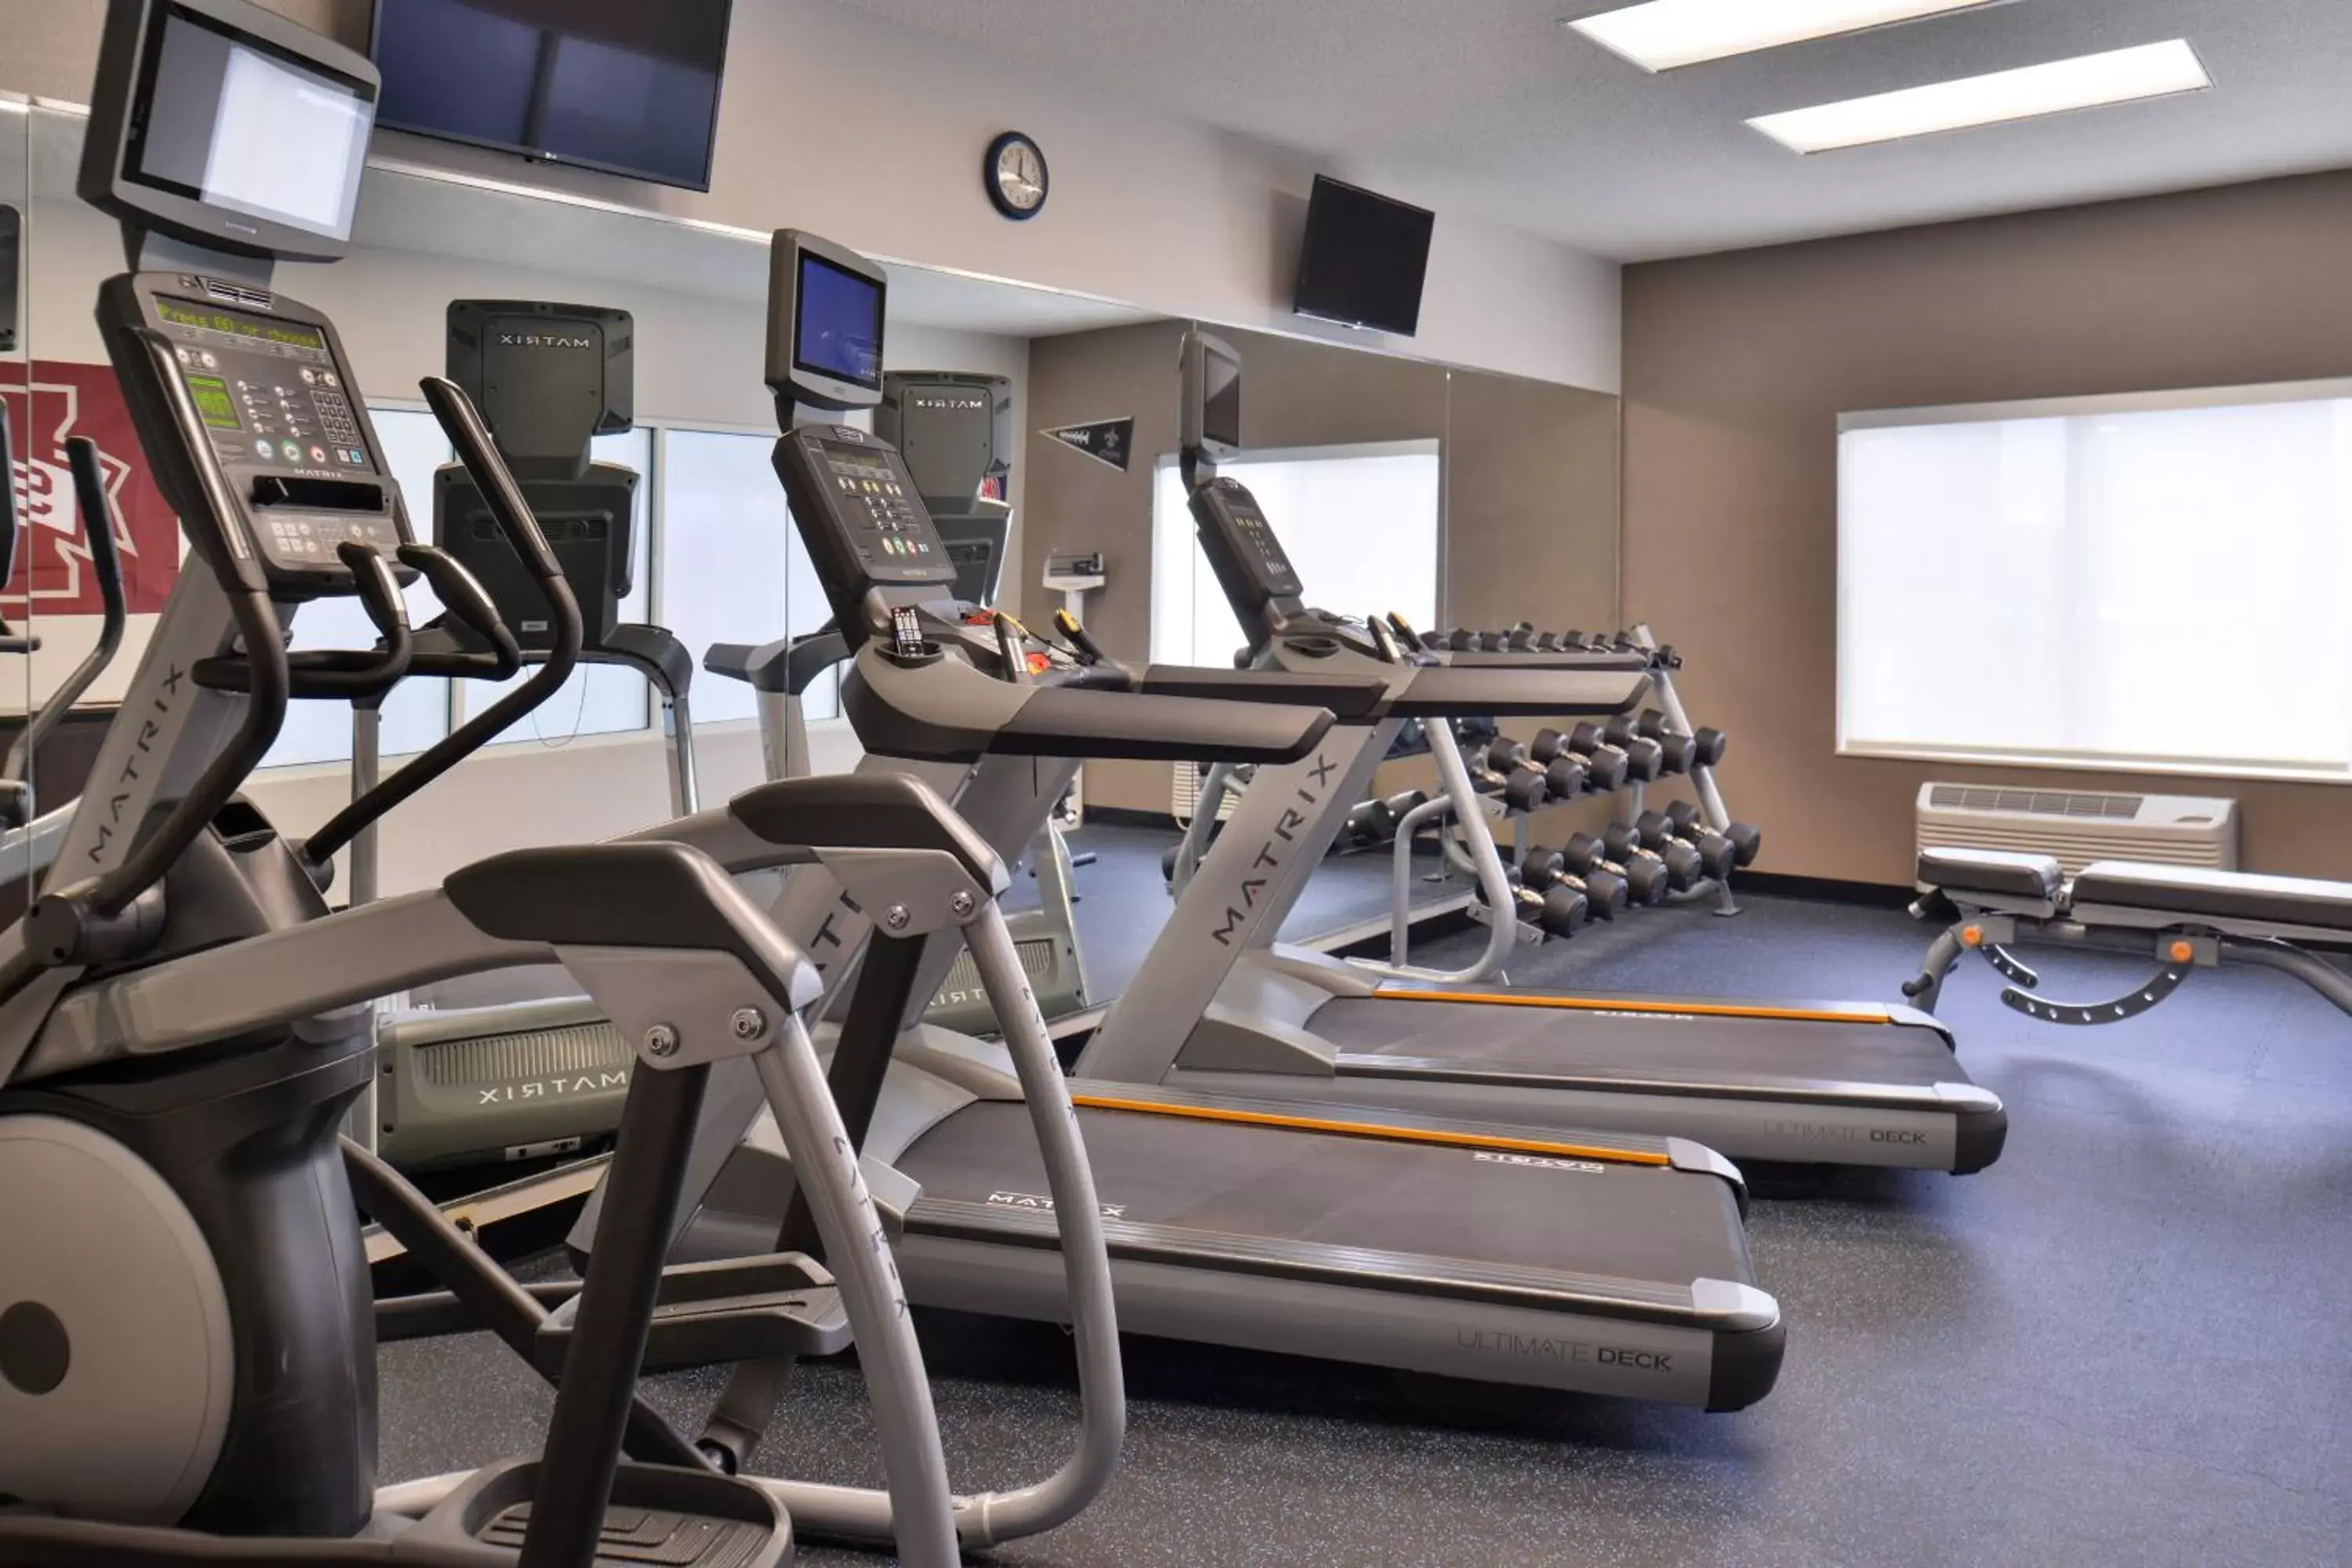 Fitness centre/facilities, Fitness Center/Facilities in Fairfield Inn and Suites Gulfport / Biloxi